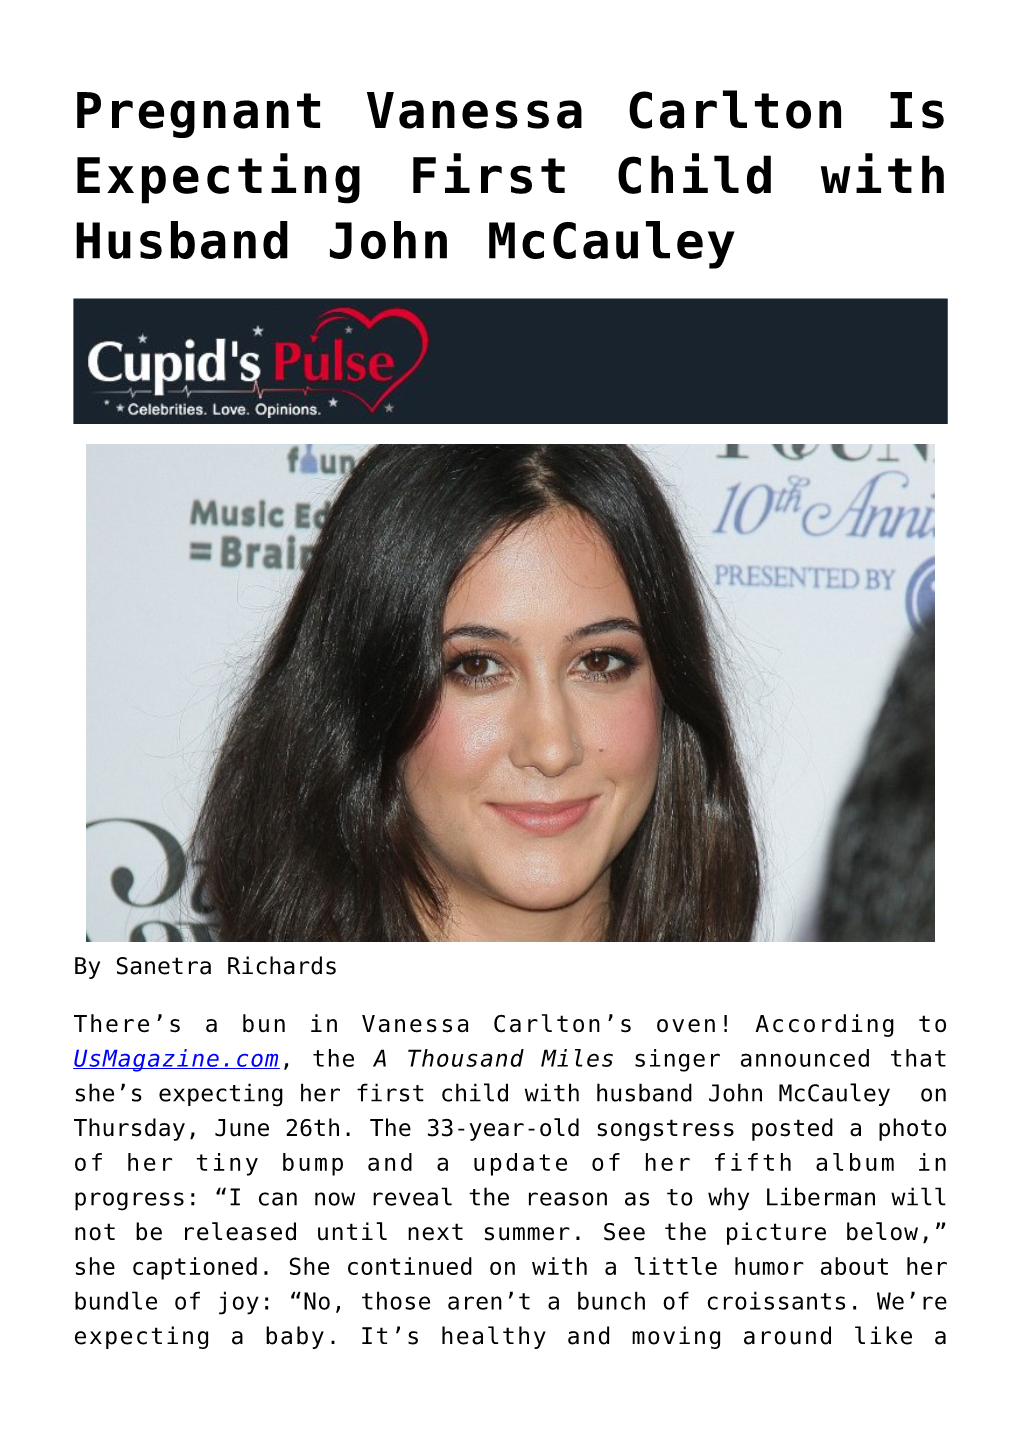 Pregnant Vanessa Carlton Is Expecting First Child with Husband John Mccauley